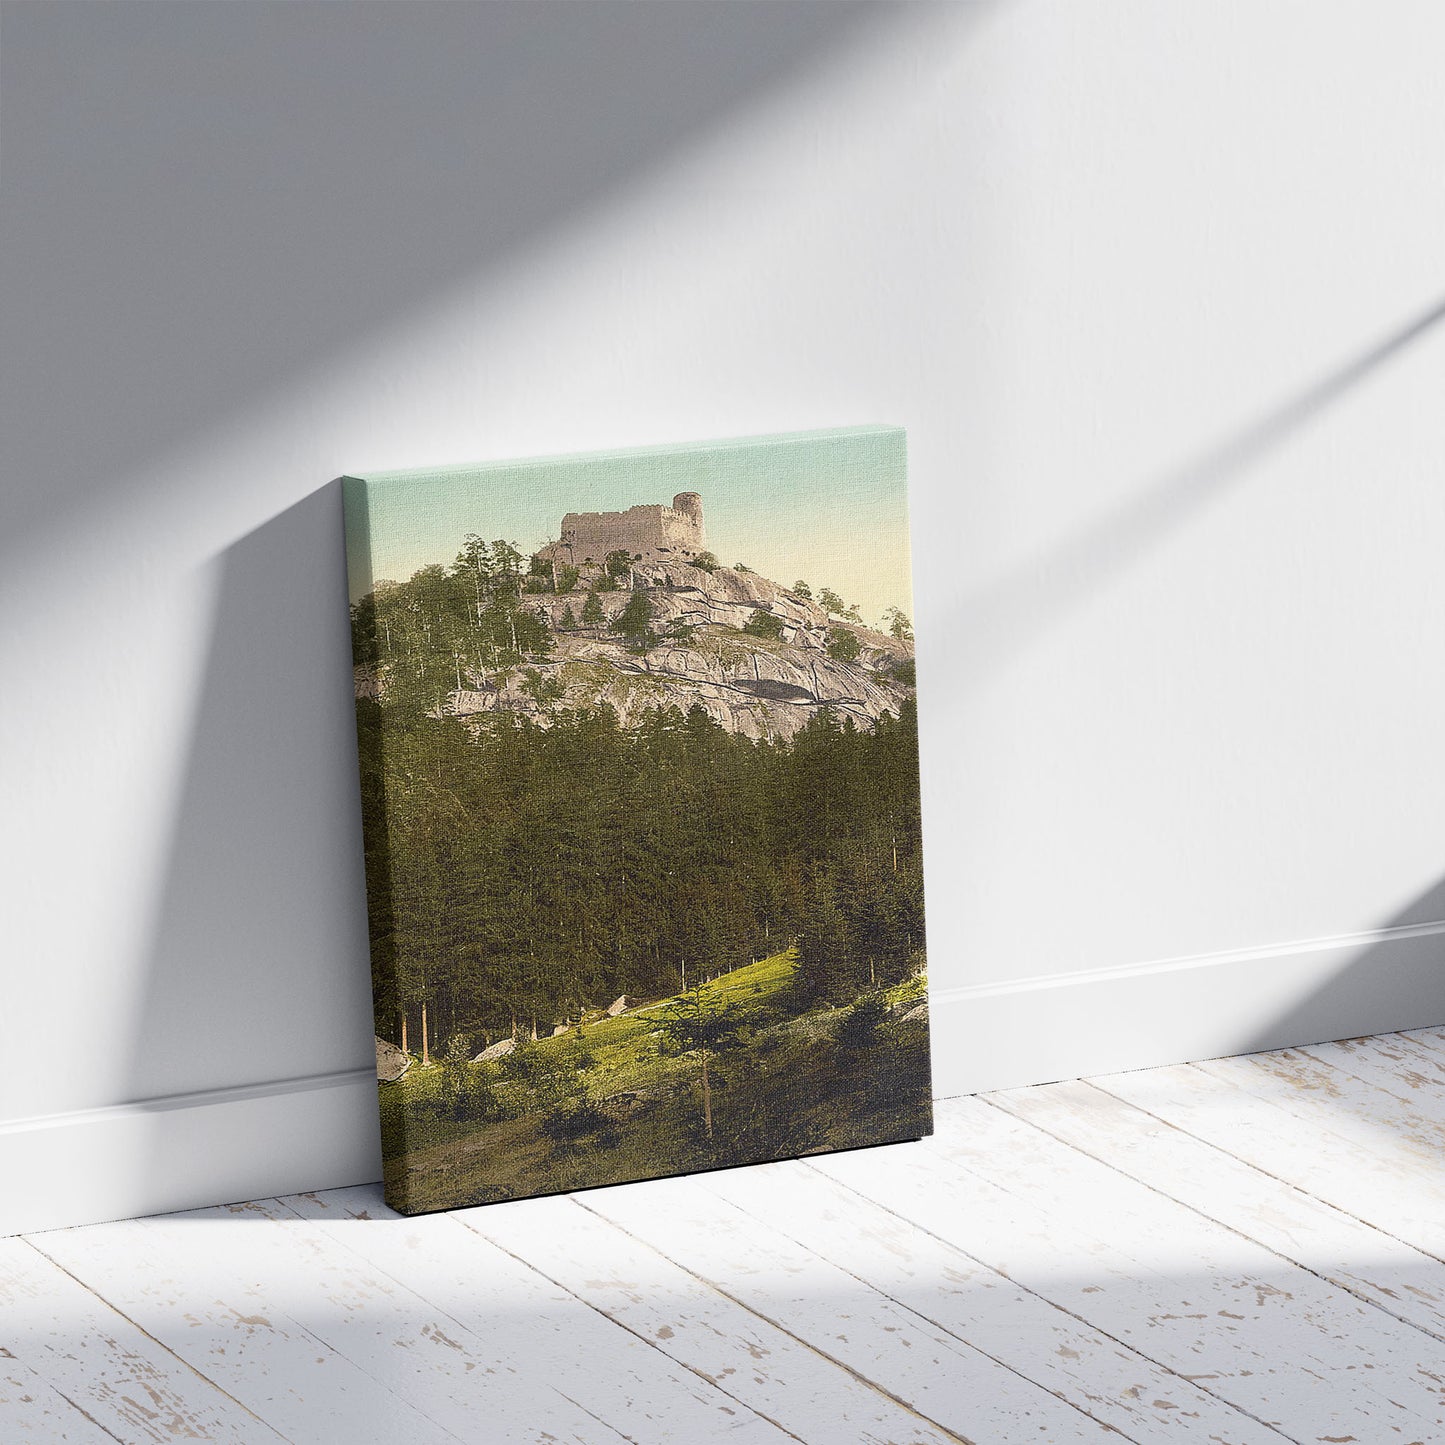 A picture of General view, Kynast, Riesengebirge, Germany, a mockup of the print leaning against a wall